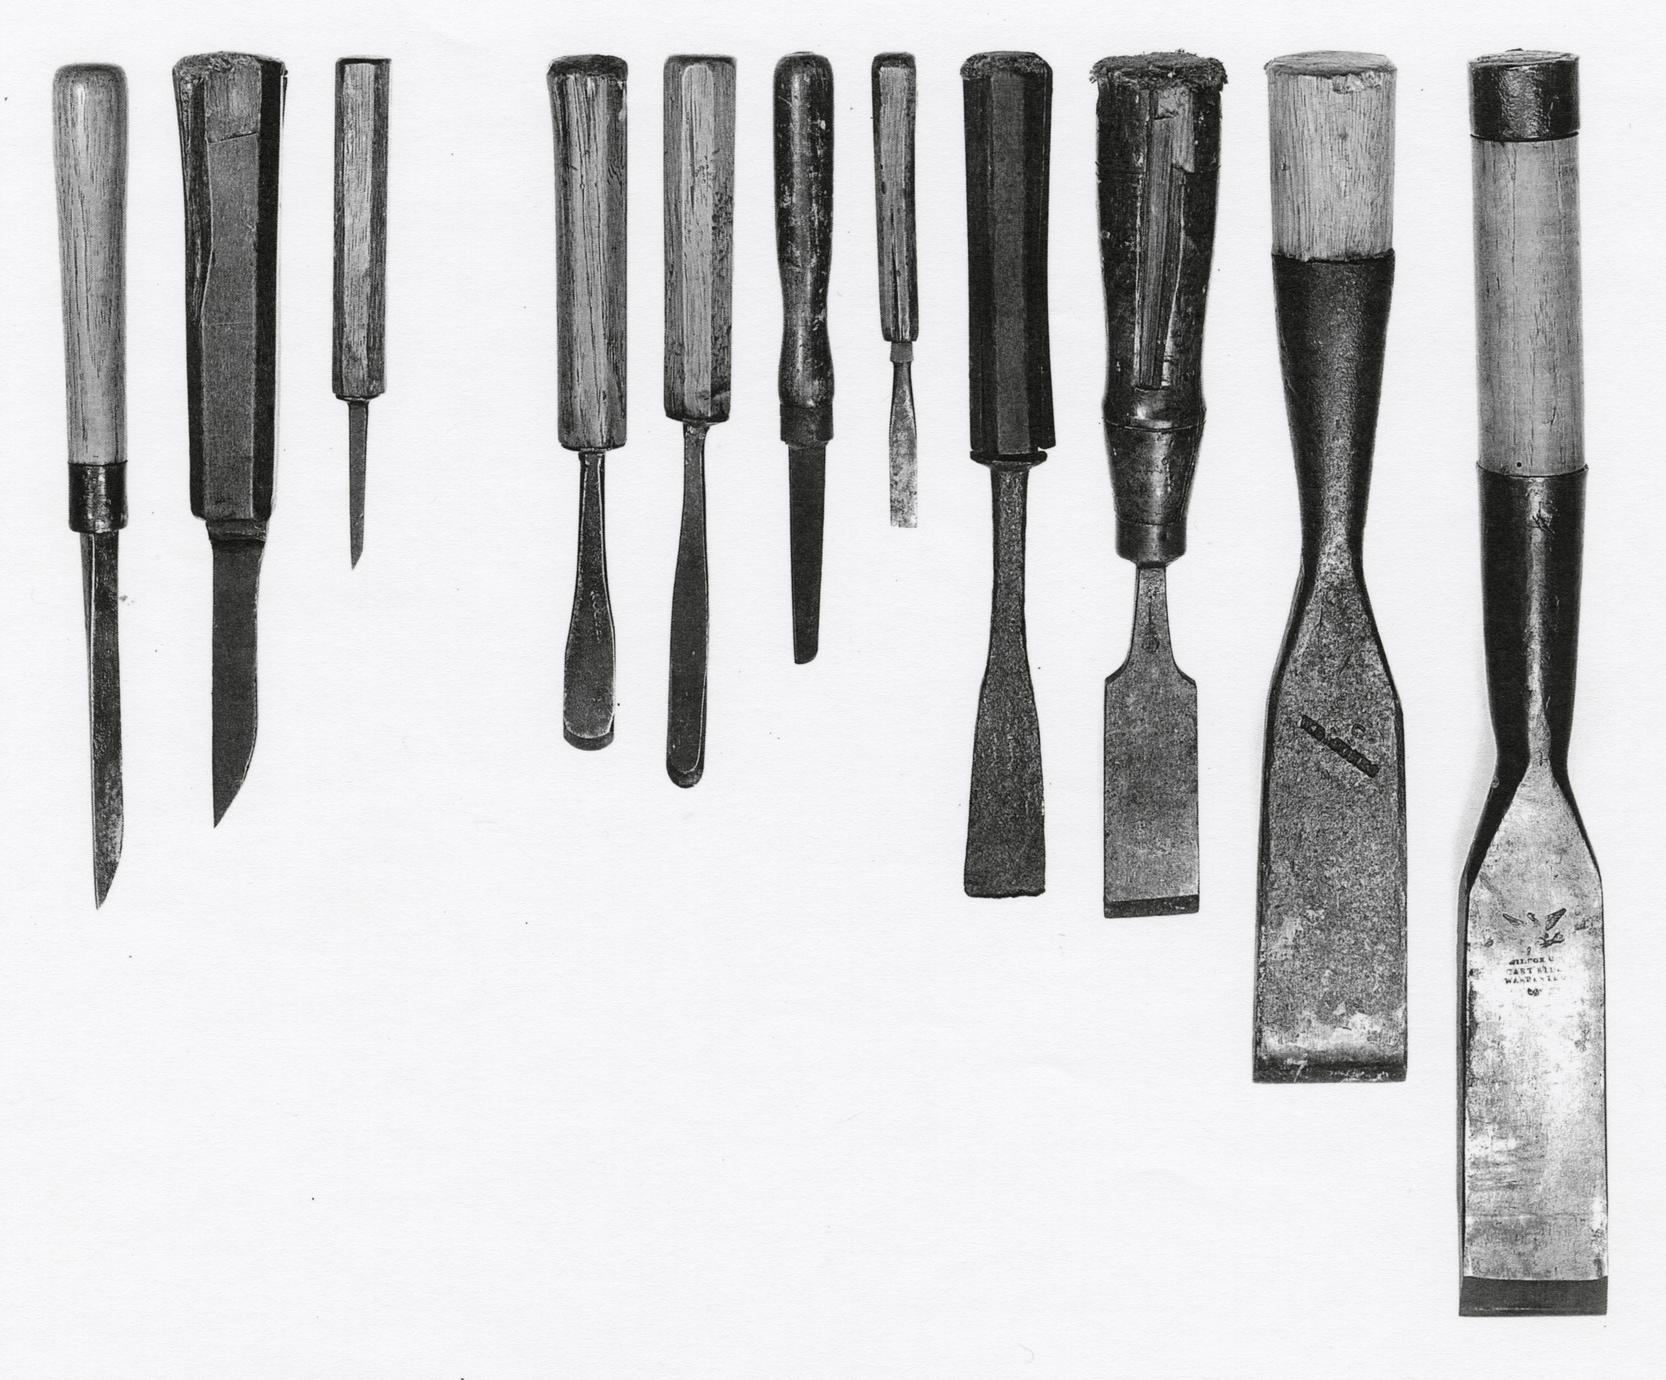 Eleven examples of different sizes and shapes of chisels.